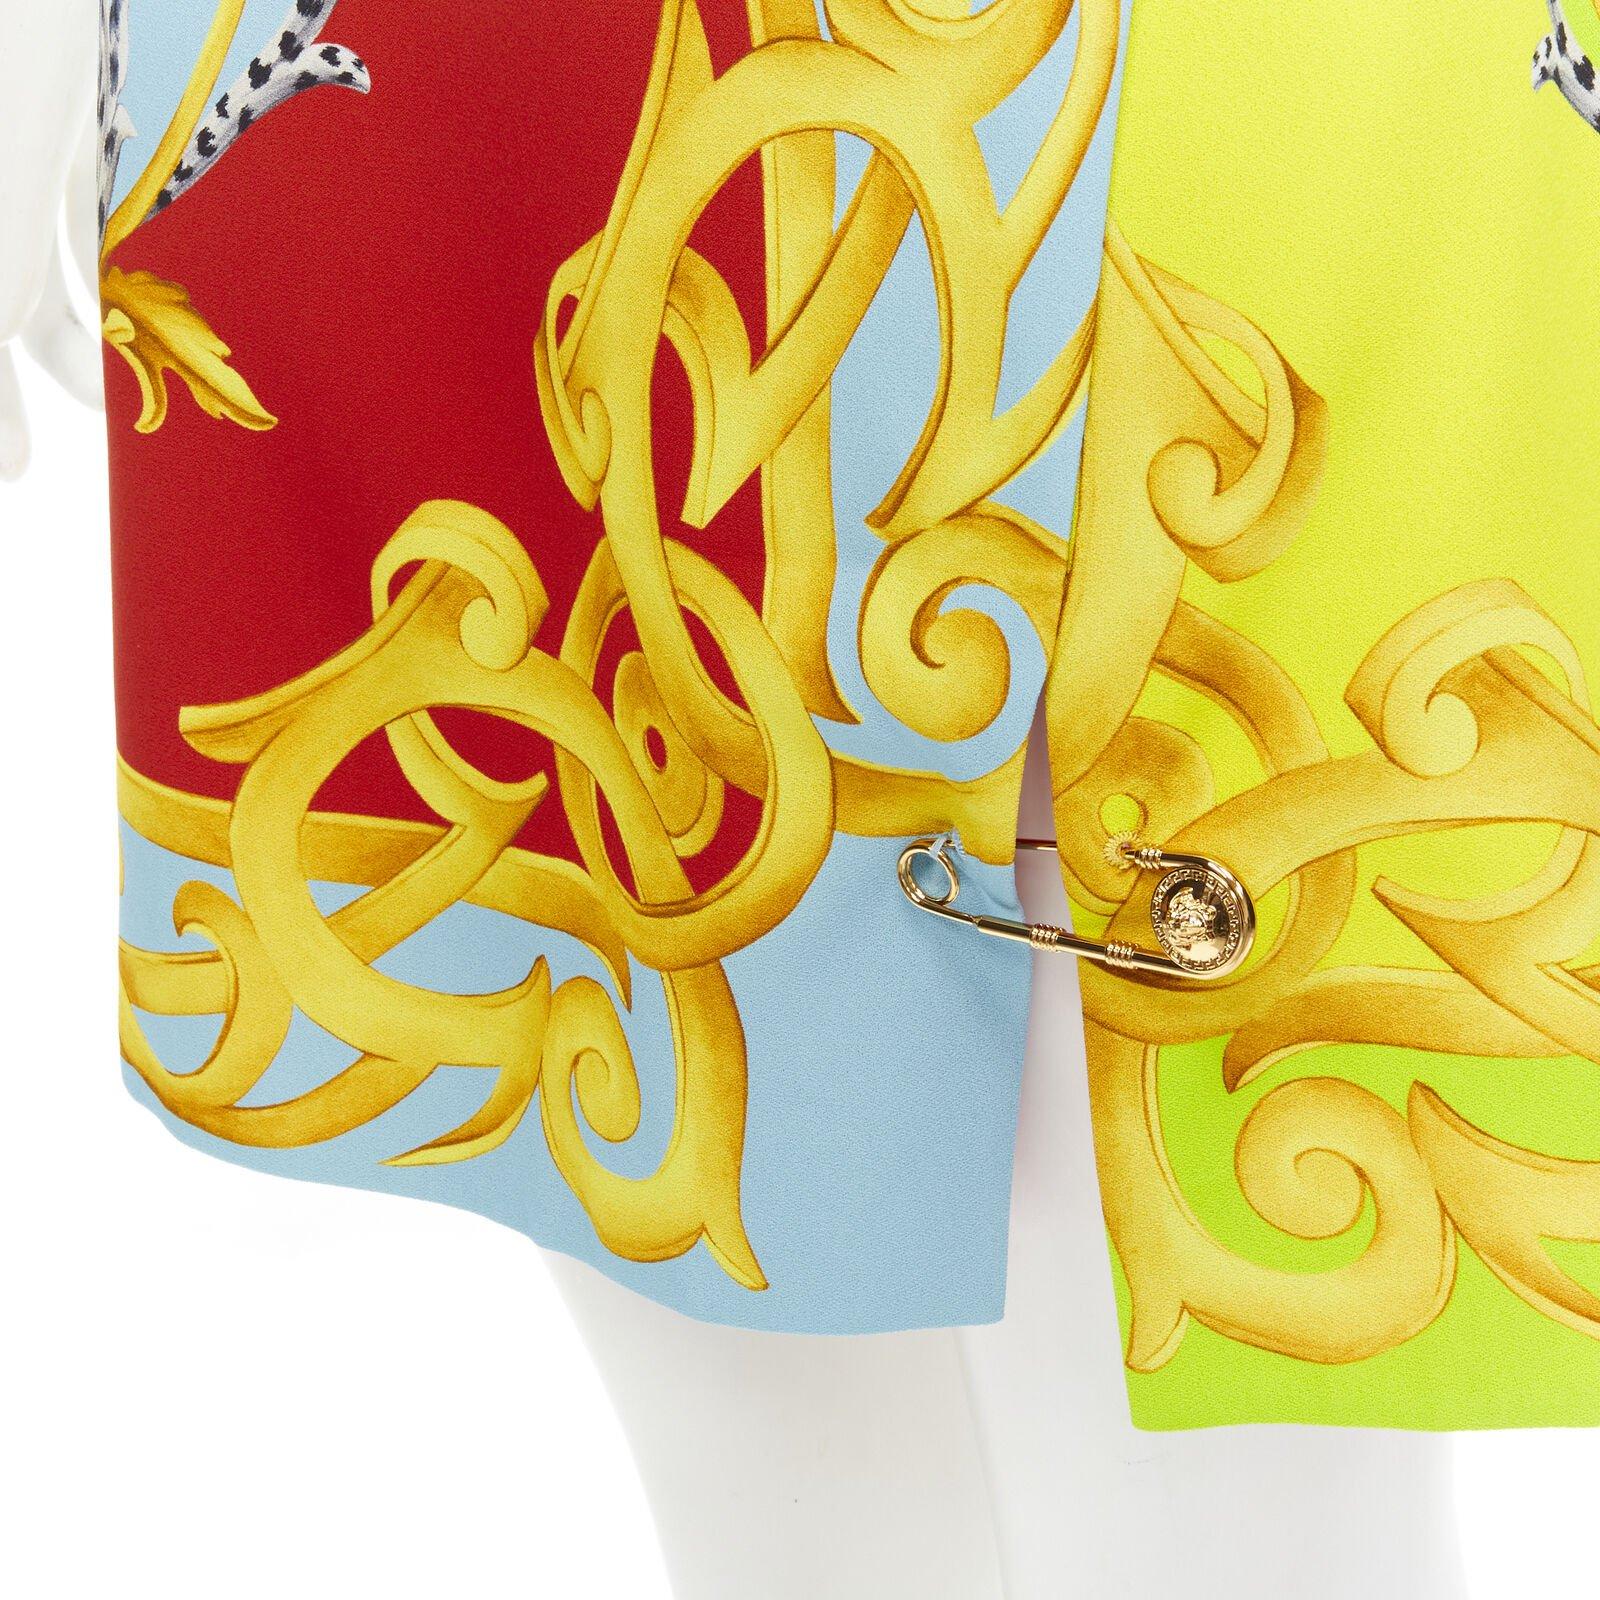 VERSACE Pop Acantus Barocco gold Medusa safety pin slit mini skirt IT40 S
Reference: TGAS/C00986
Brand: Versace
Designer: Donatella Versace
Model: A83920 A236444 A7000
Collection: Pop Acanthus Barocco
Material: Viscose
Color: Multicolour
Pattern: